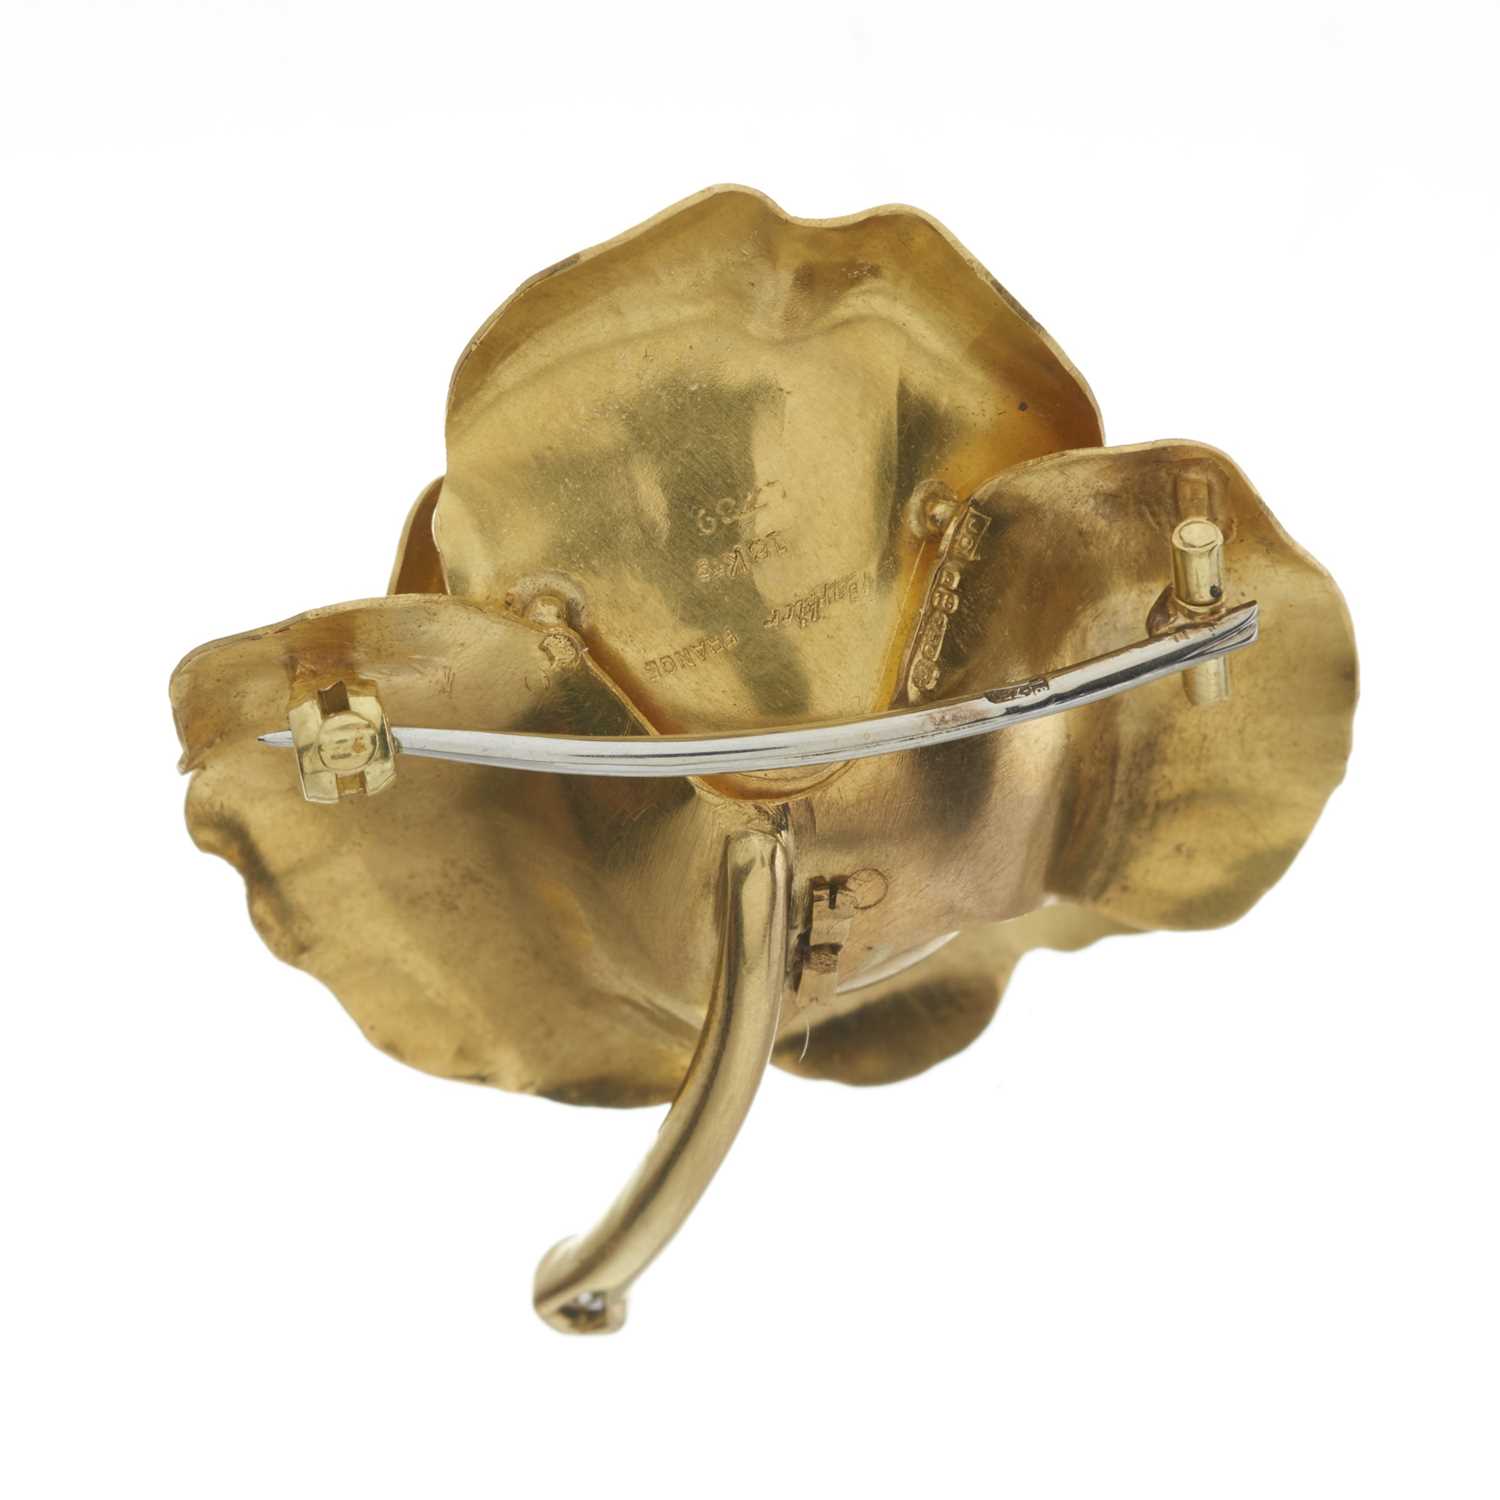 Cartier, a 1960s 18ct gold diamond and pearl rose brooch - Image 2 of 2